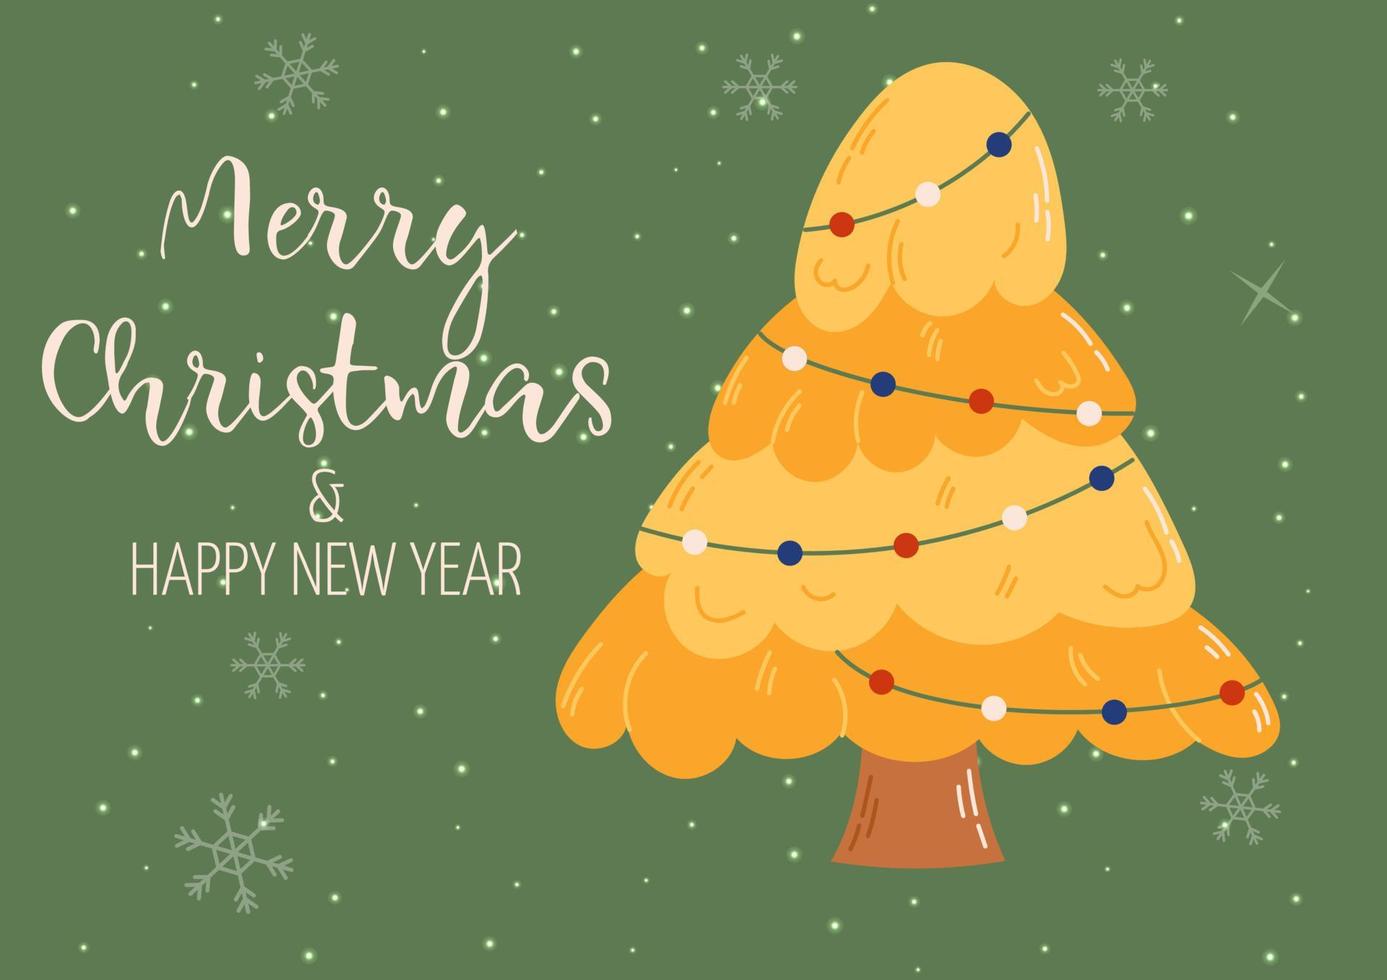 Groovy Christmas card with christmas tree. Christmas and New Year celebration concept. Good for greeting card, invitation, banner, web design. vector